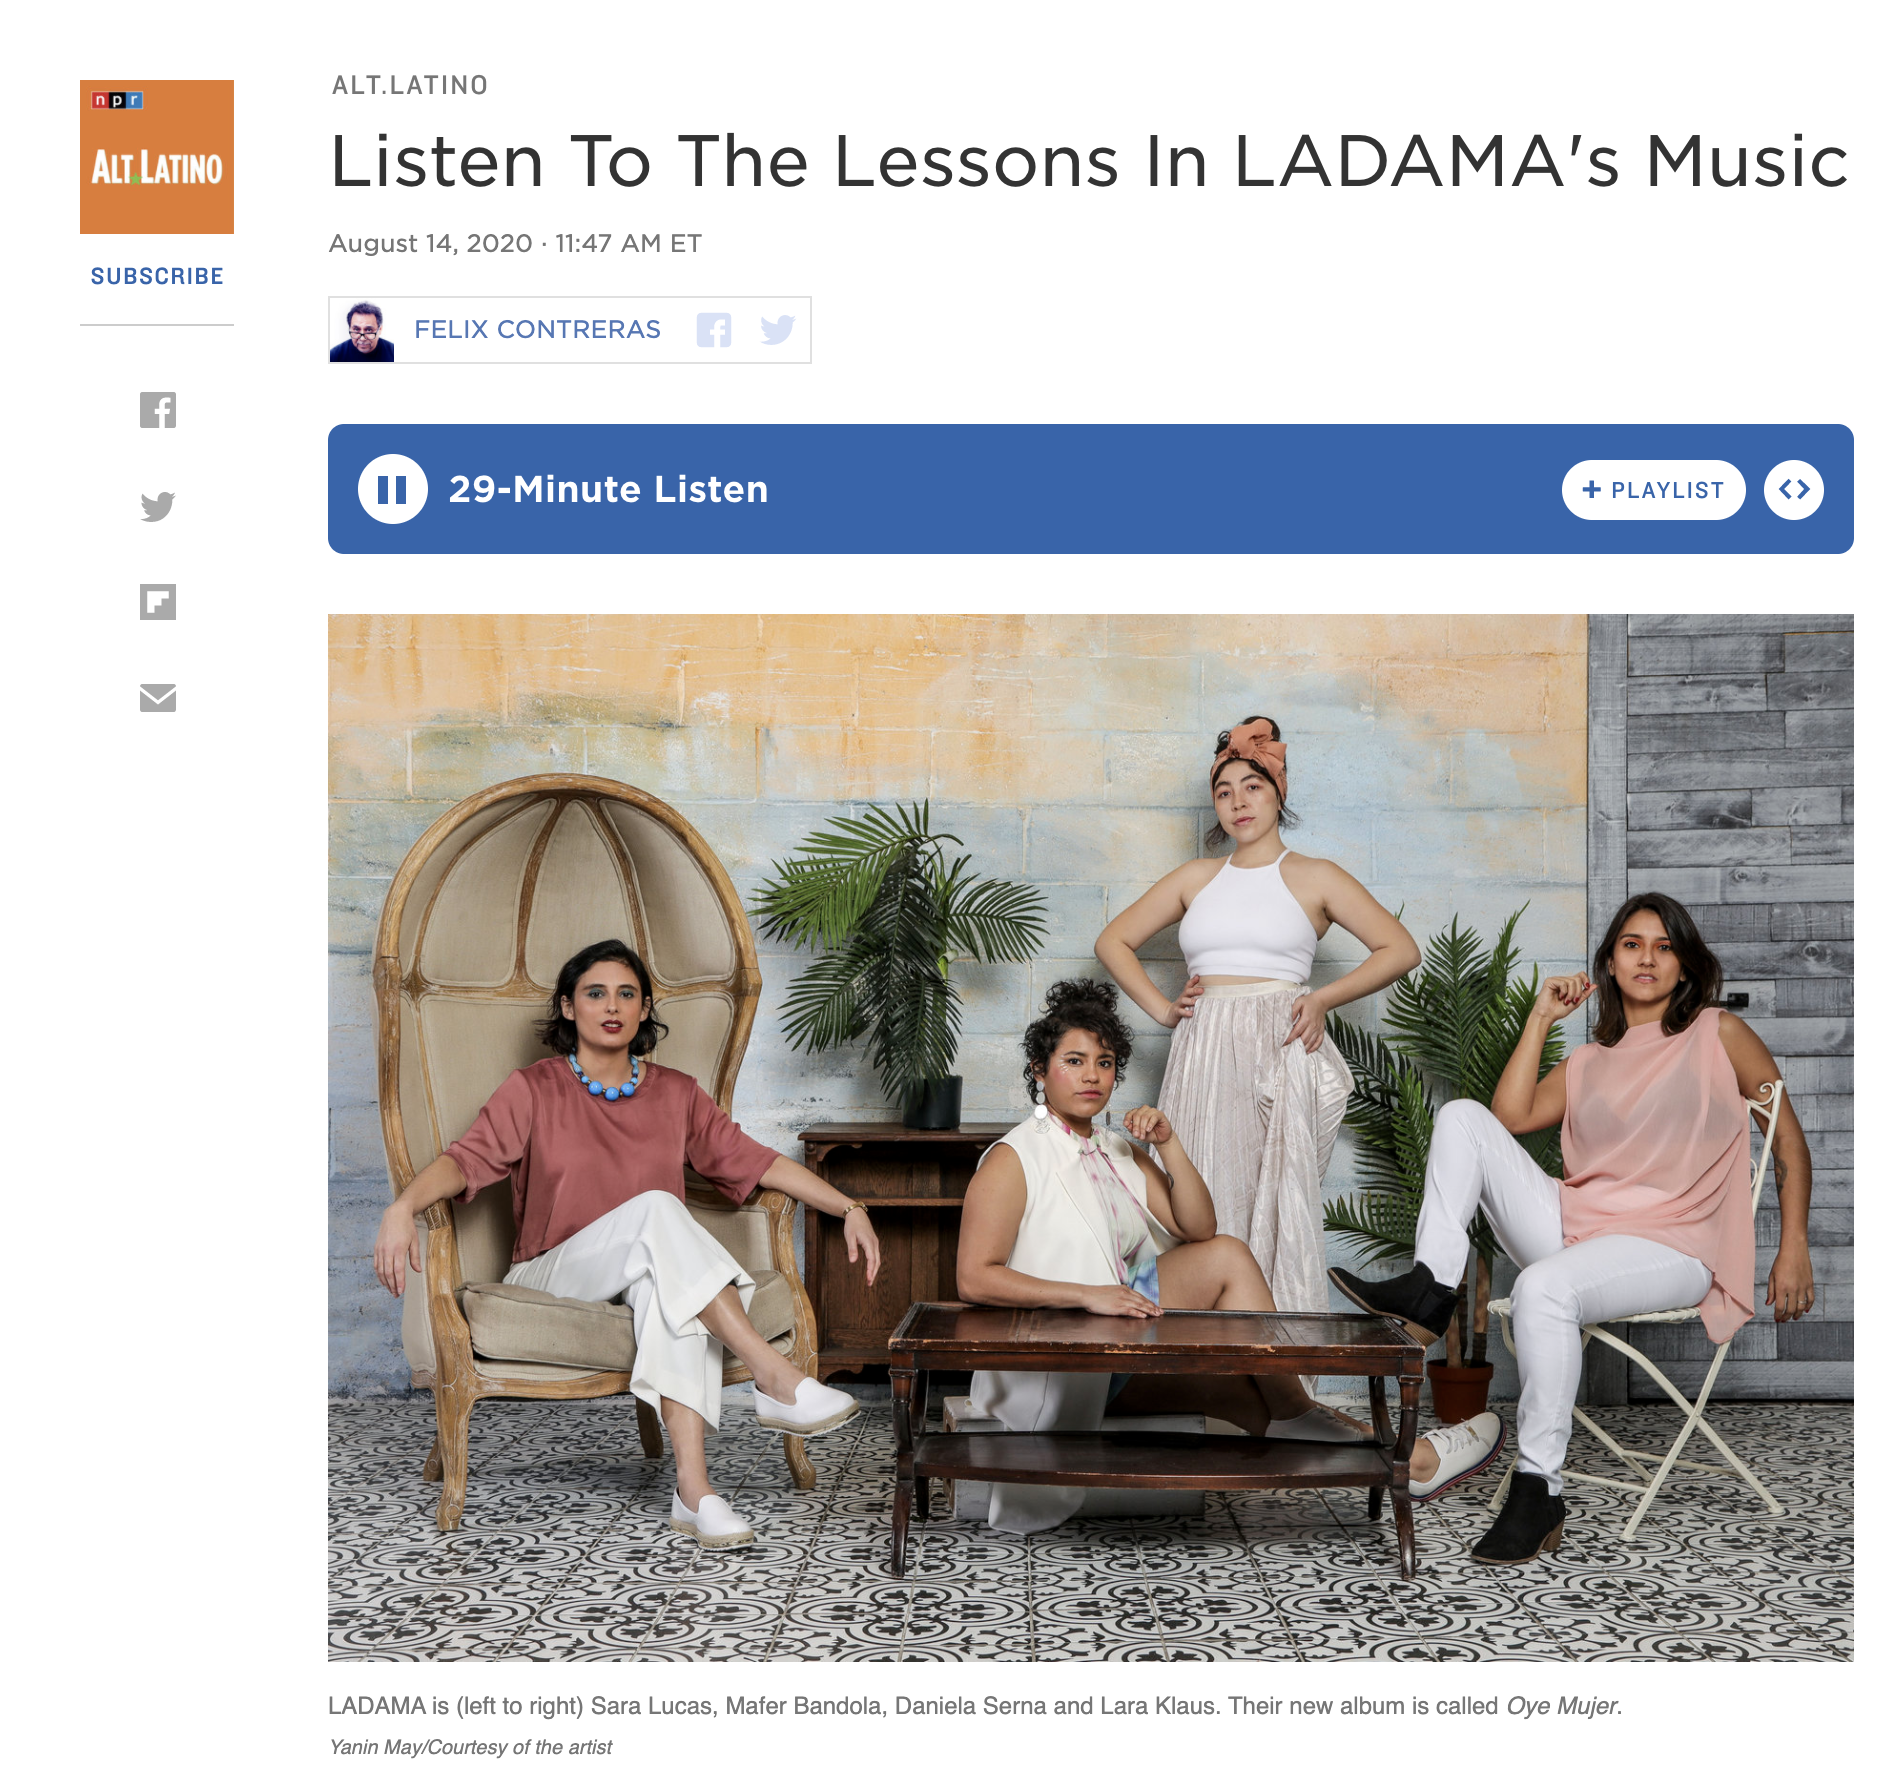 FROM NPR’S ALT LATINO: Listen To The Lessons In LADAMA’s Music